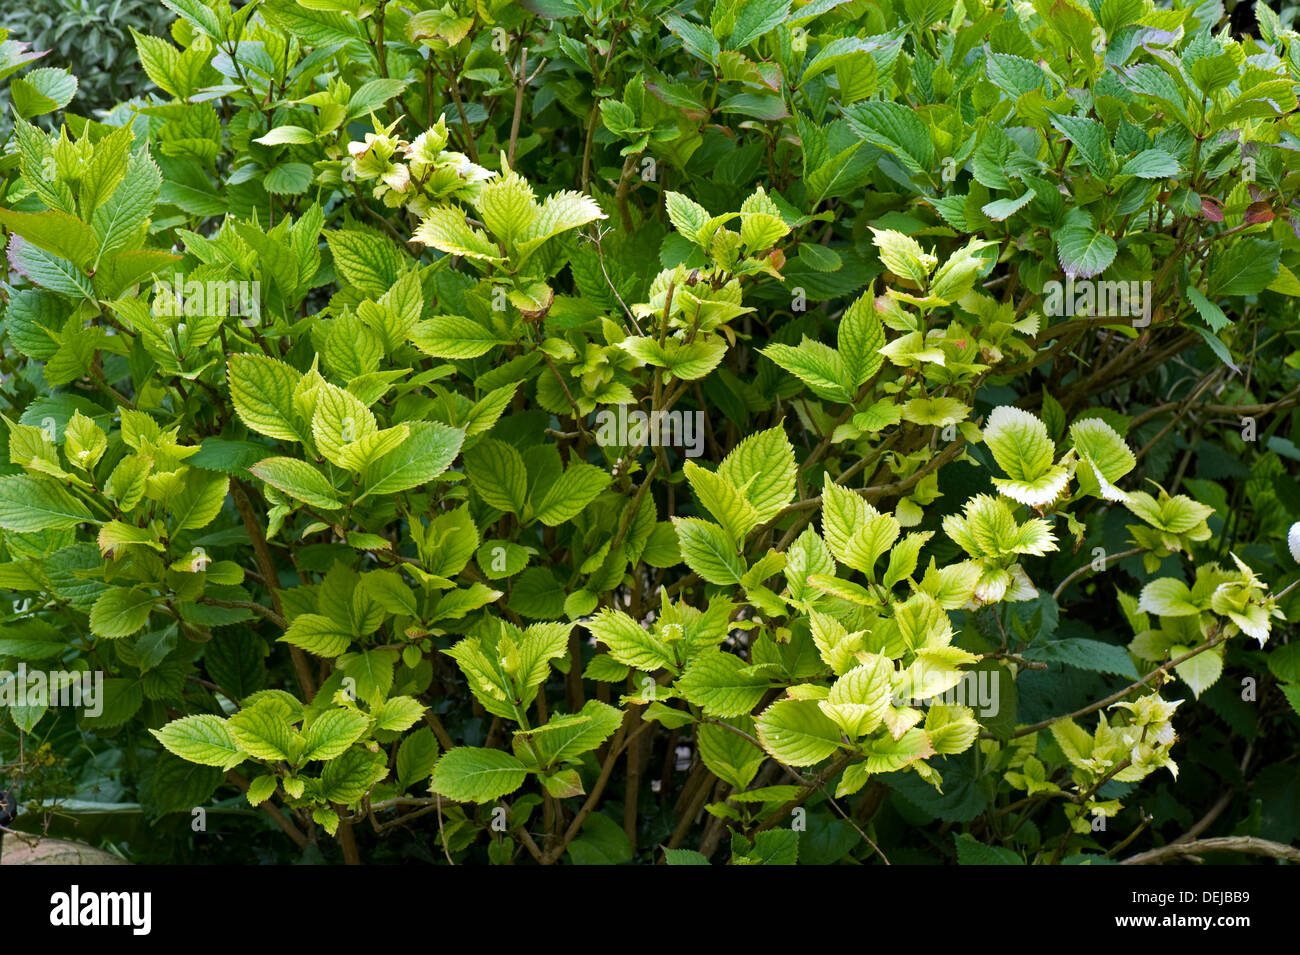 Lime induced iron and nitrogen deficiency causing chlorosis of the leaves of a Hydrangea macrophylla garden shrub Stock Photo